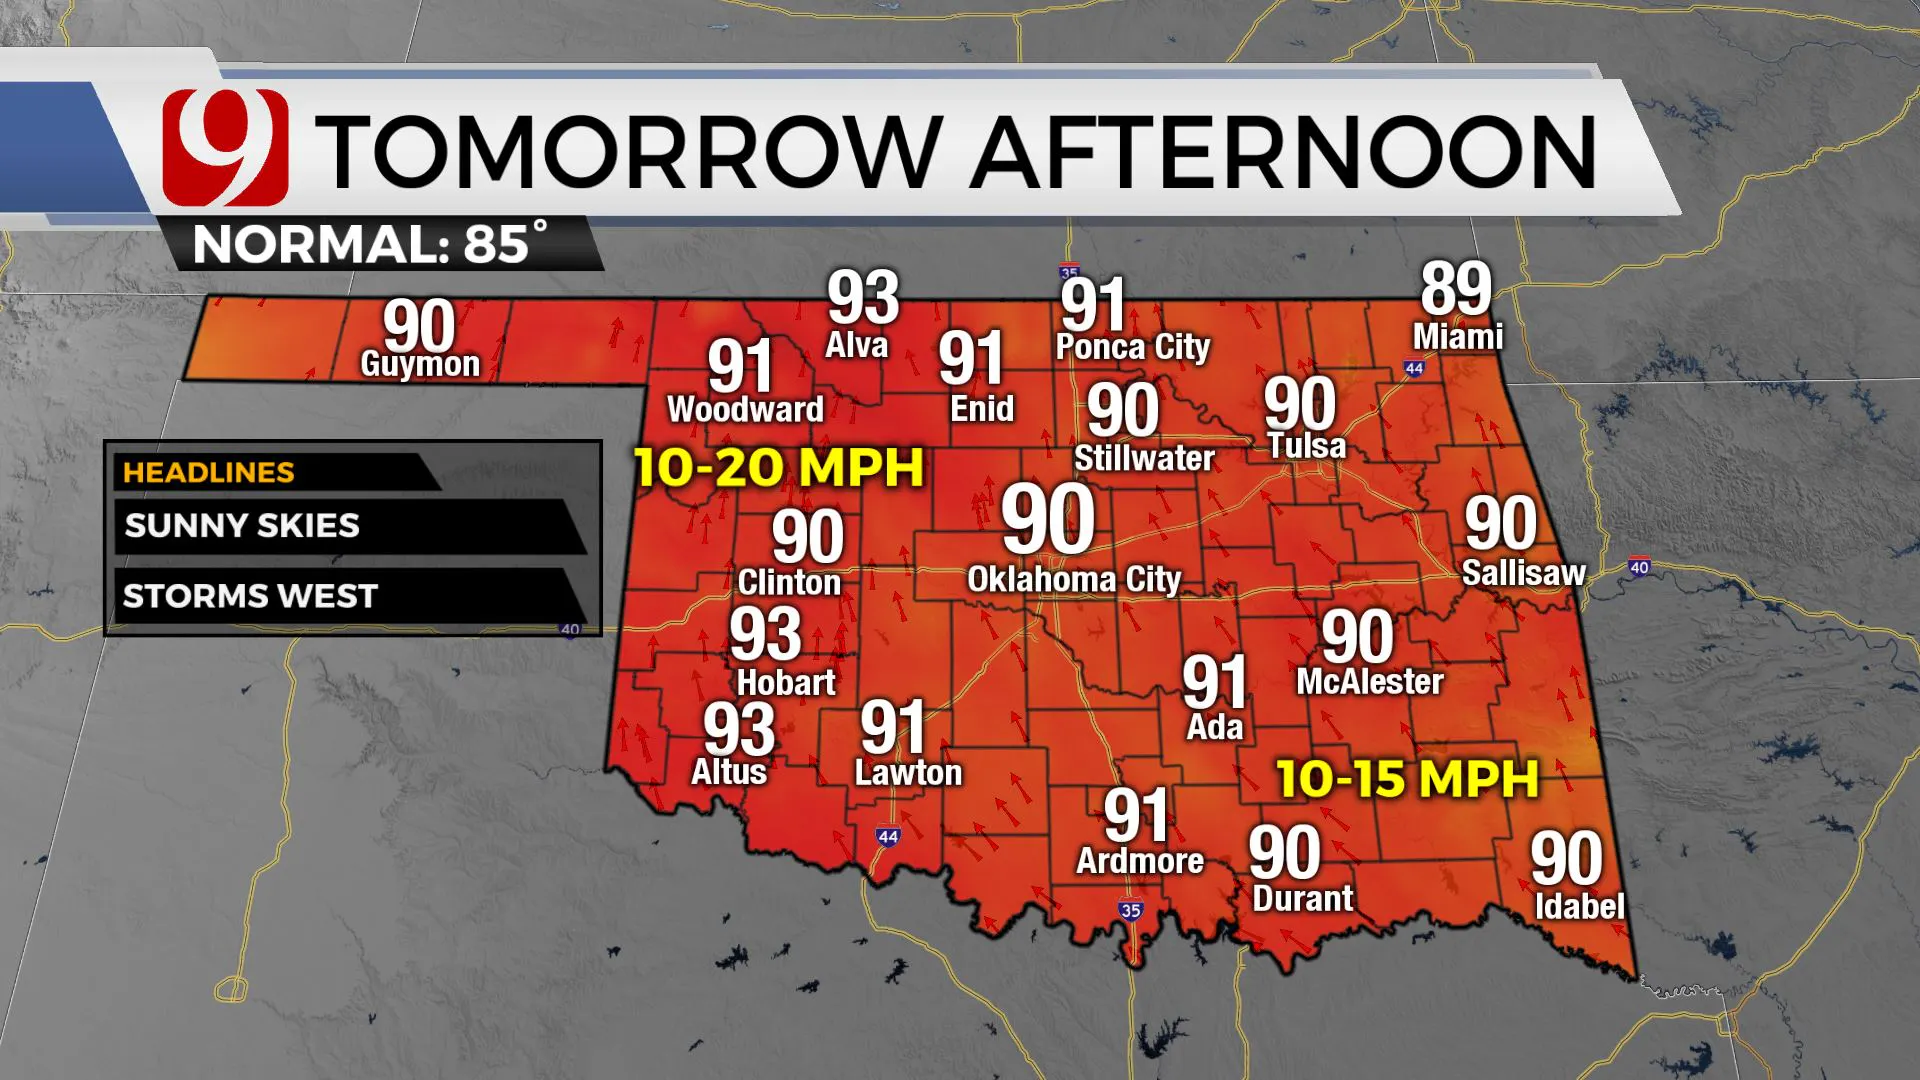 Temps for tomorrow afternoon.